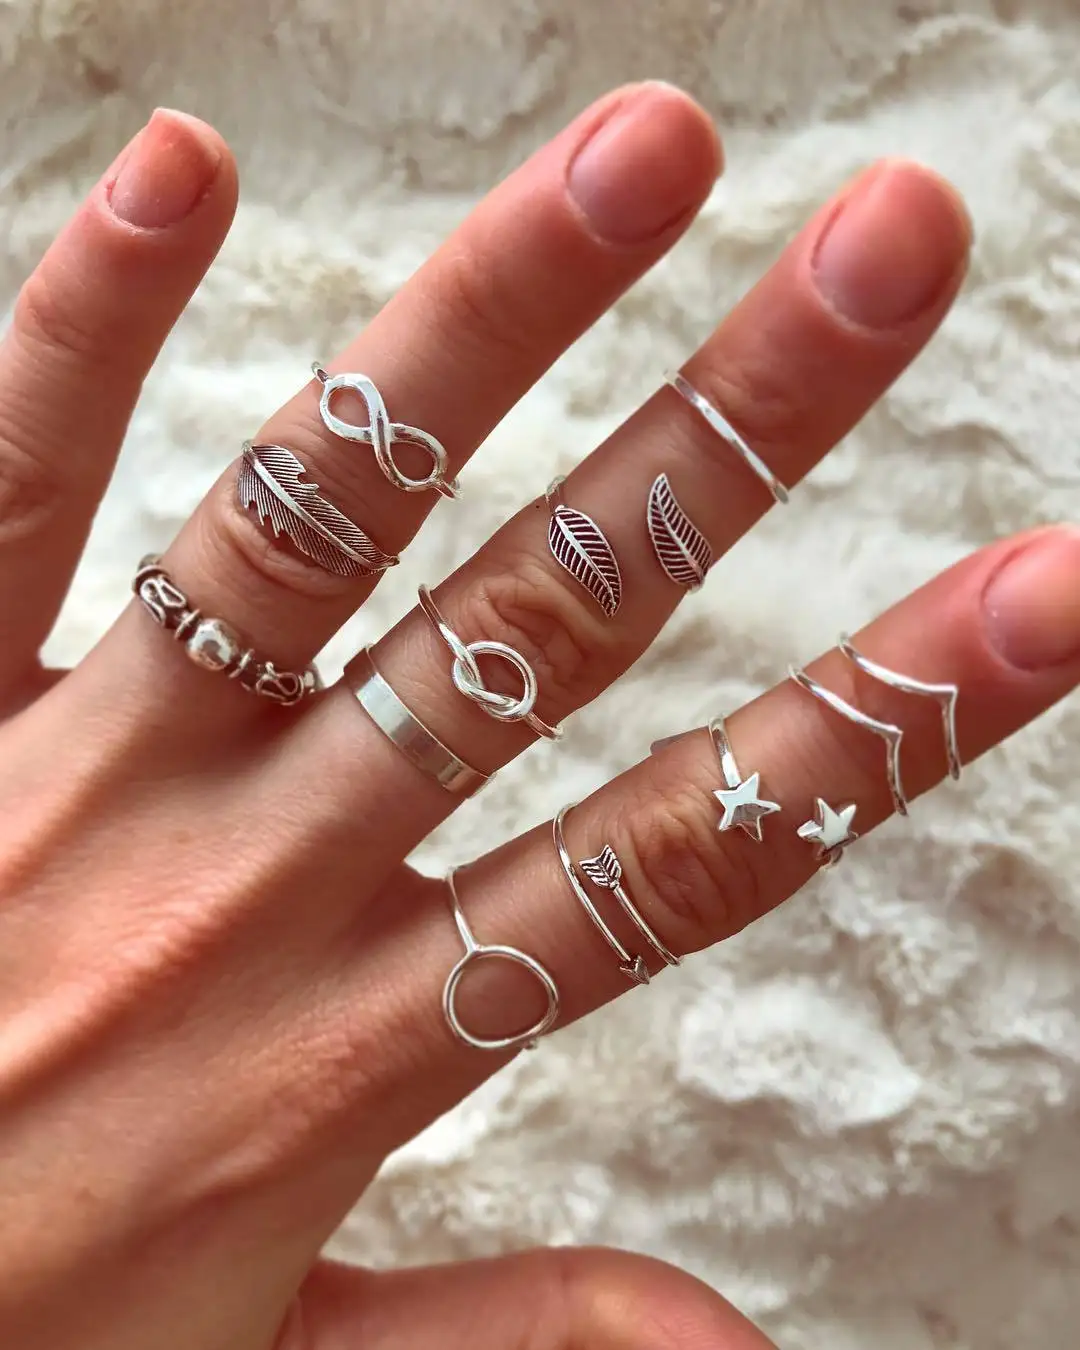 

12Pcs Set Women Fashion Silver Color Ring Exquisite Leaves Star Arrow 8 Words Knotted Geometric Opening Ring Set Lady Jewelry